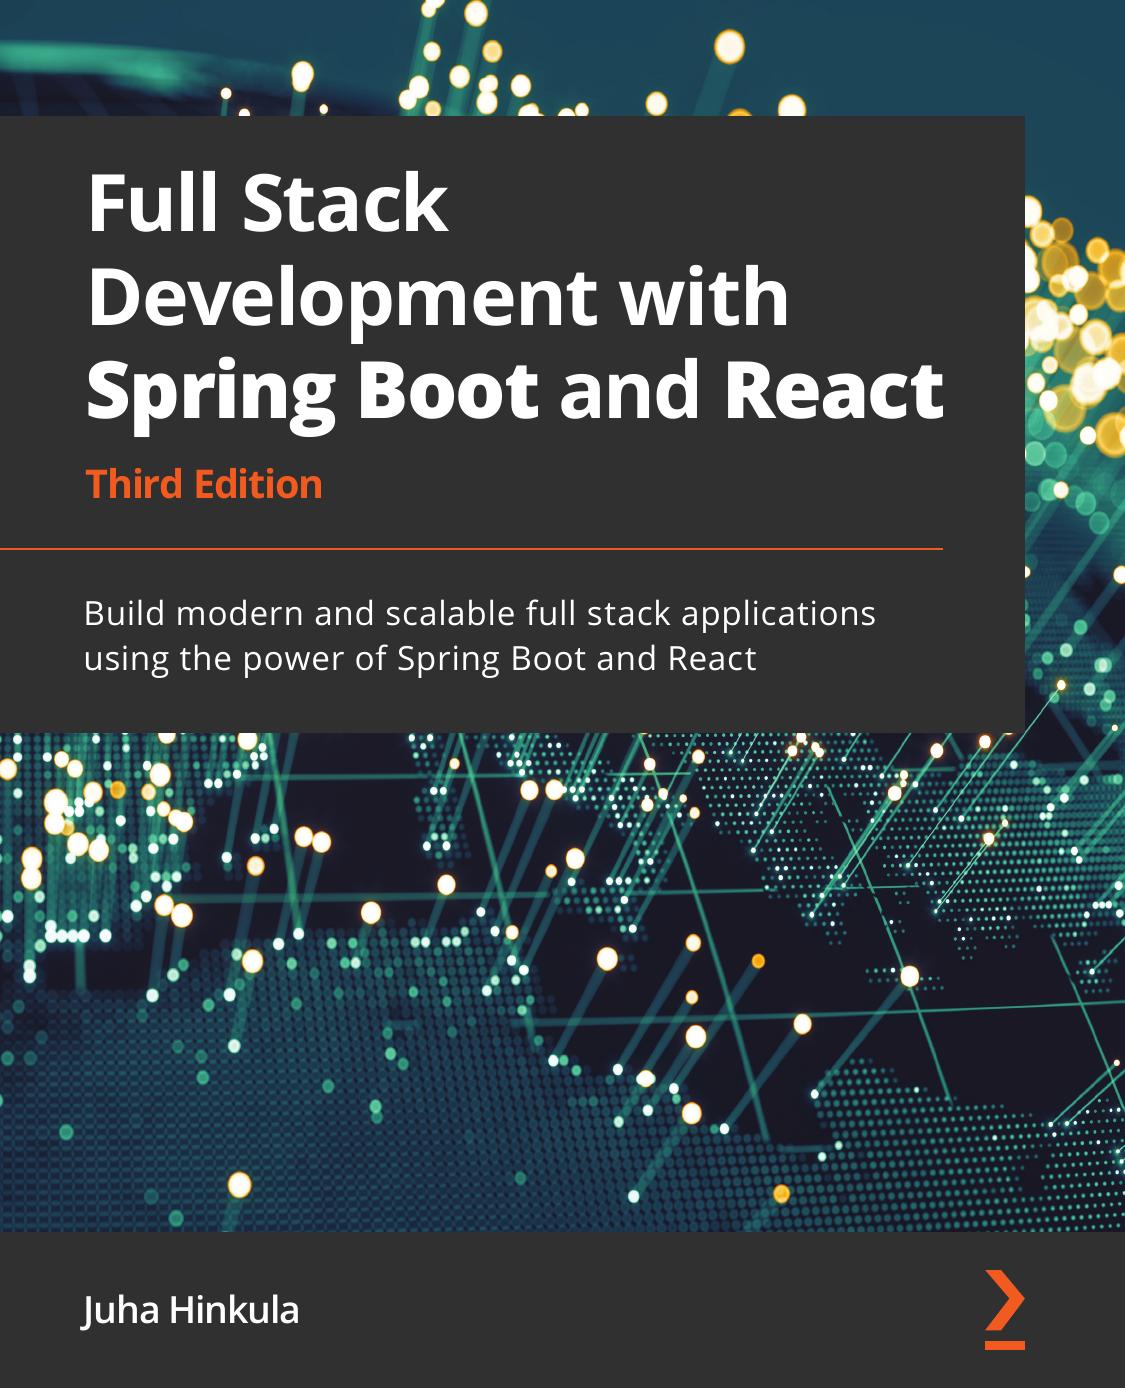 Full Stack Development With Spring Boot and React: Build Modern and Scalable Full Stack Applications Using the Power of Spring Boot and React, 3rd Edition